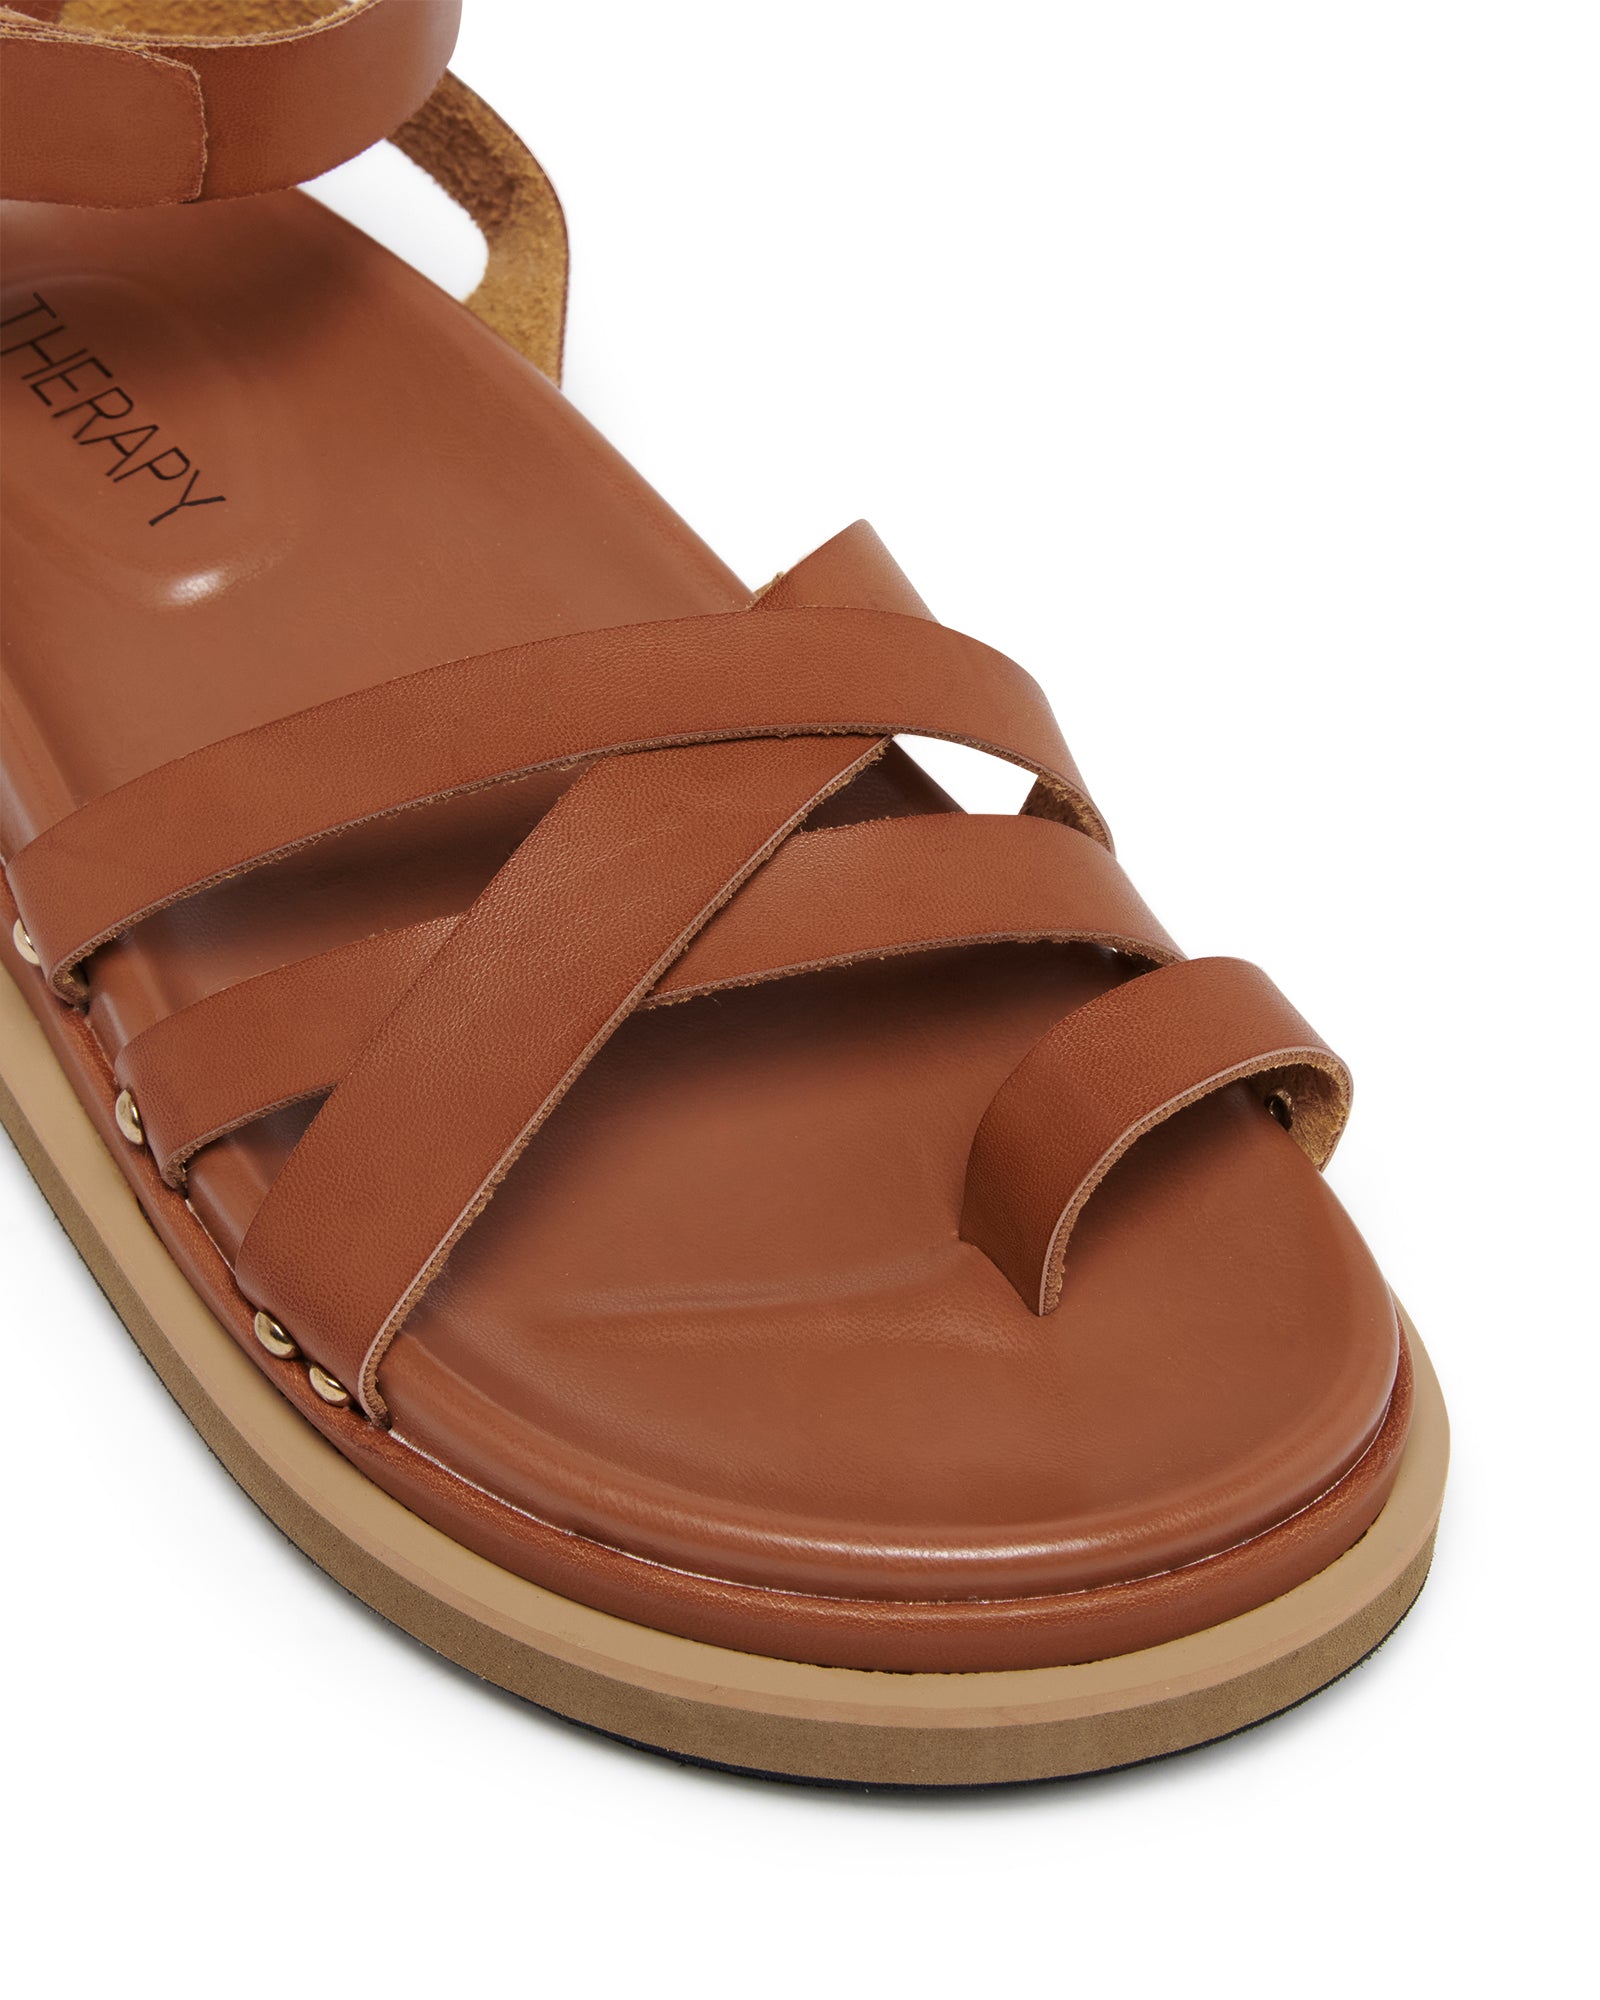 Therapy Shoes Coco Tan | Women's Sandals | Flatform | Chunky | Footbed